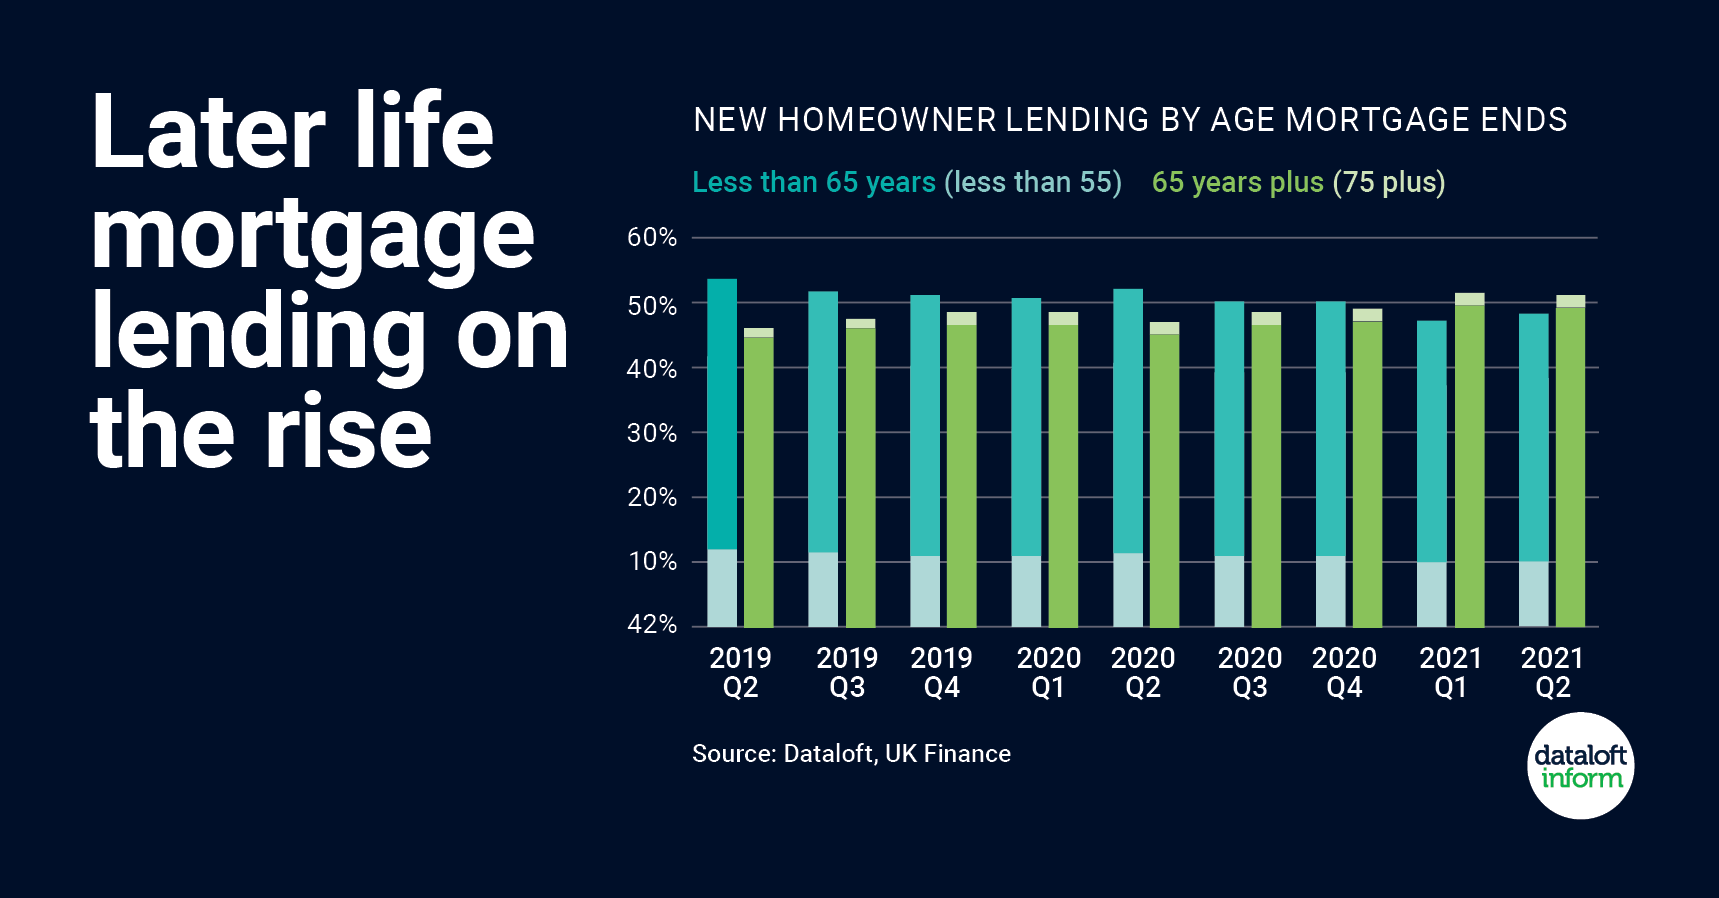 Mortgage lending in later life is on the rise.